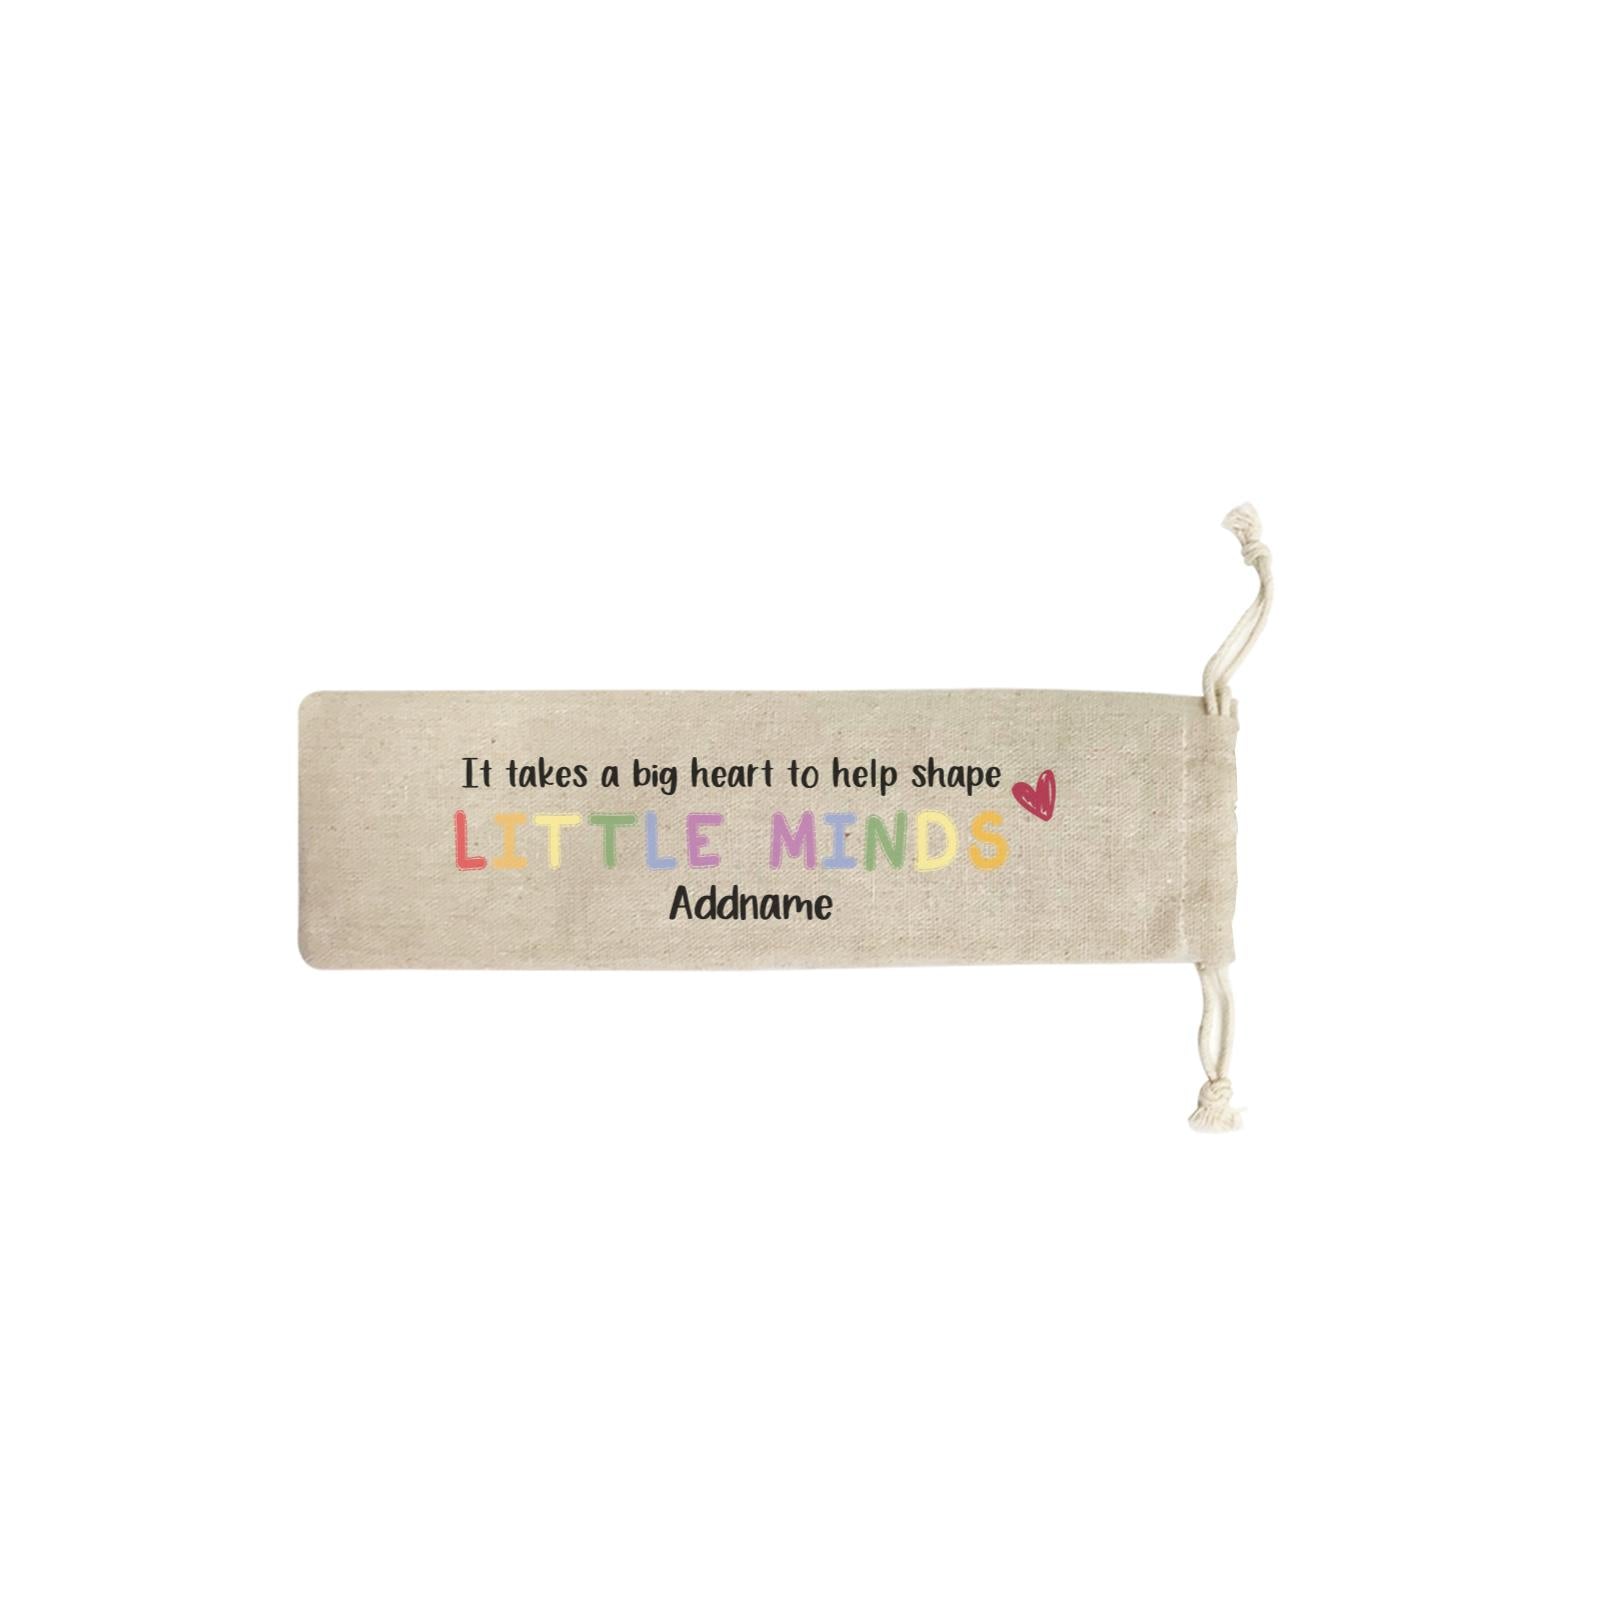 Teacher Quotes 2 It Takes A Big Heart To Help Shape Little Minds Addname SB Straw Pouch (No Straws included)